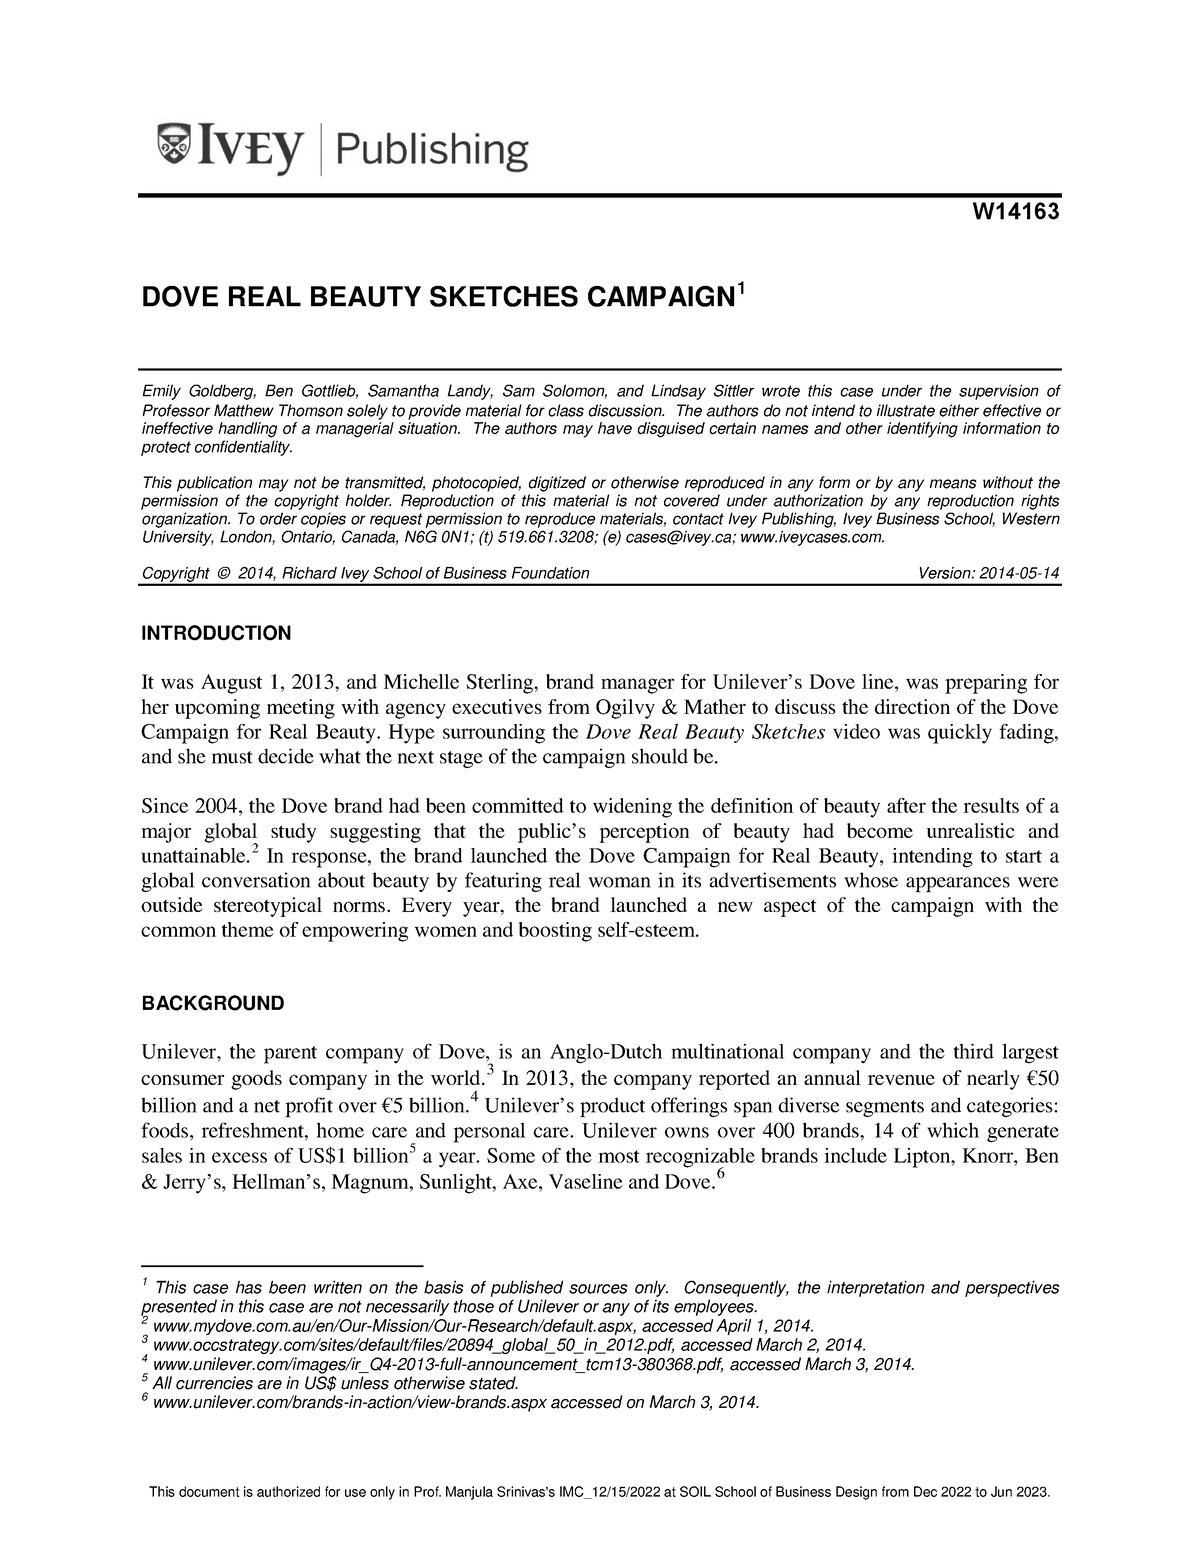 Dove Real Beauty Sketches Campaign Case Solution And Analysis HBR Case  Study Solution  Analysis of Harvard Case Studies